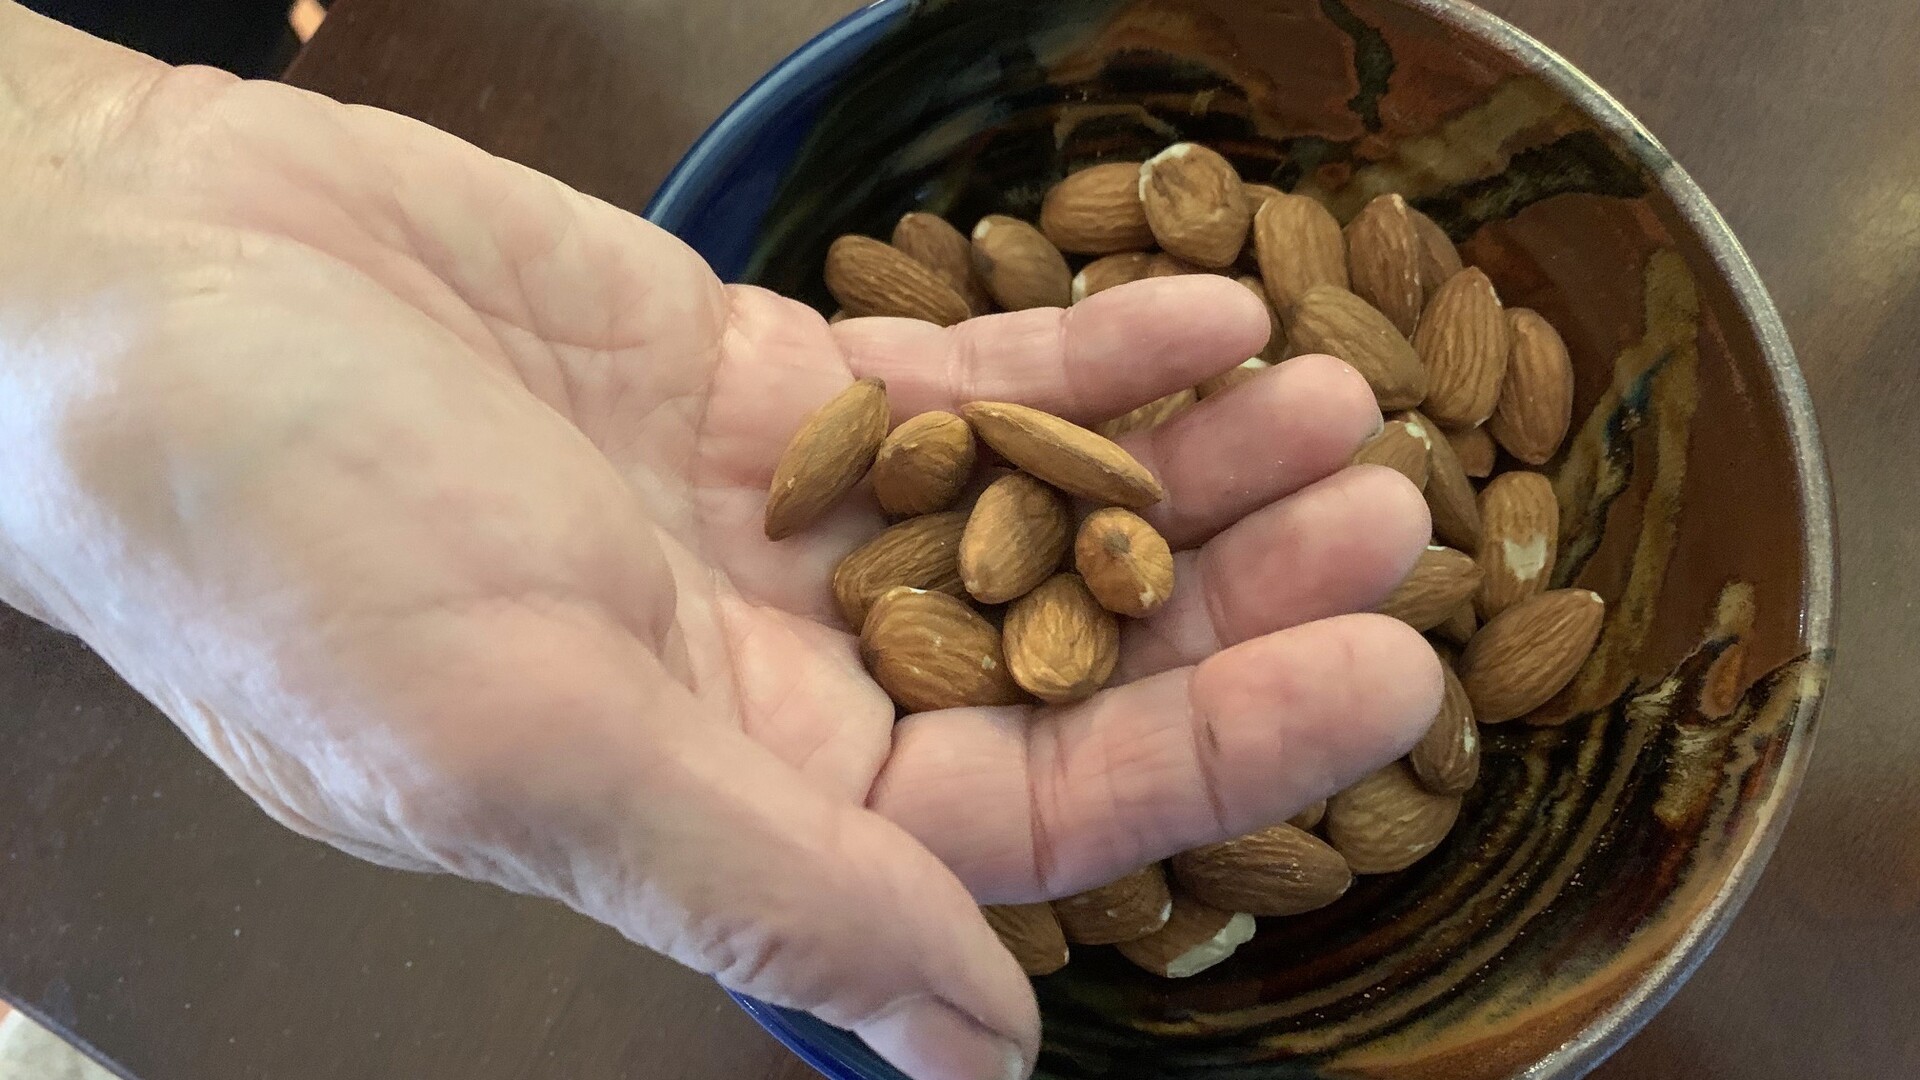 Are Almonds Over-planted?